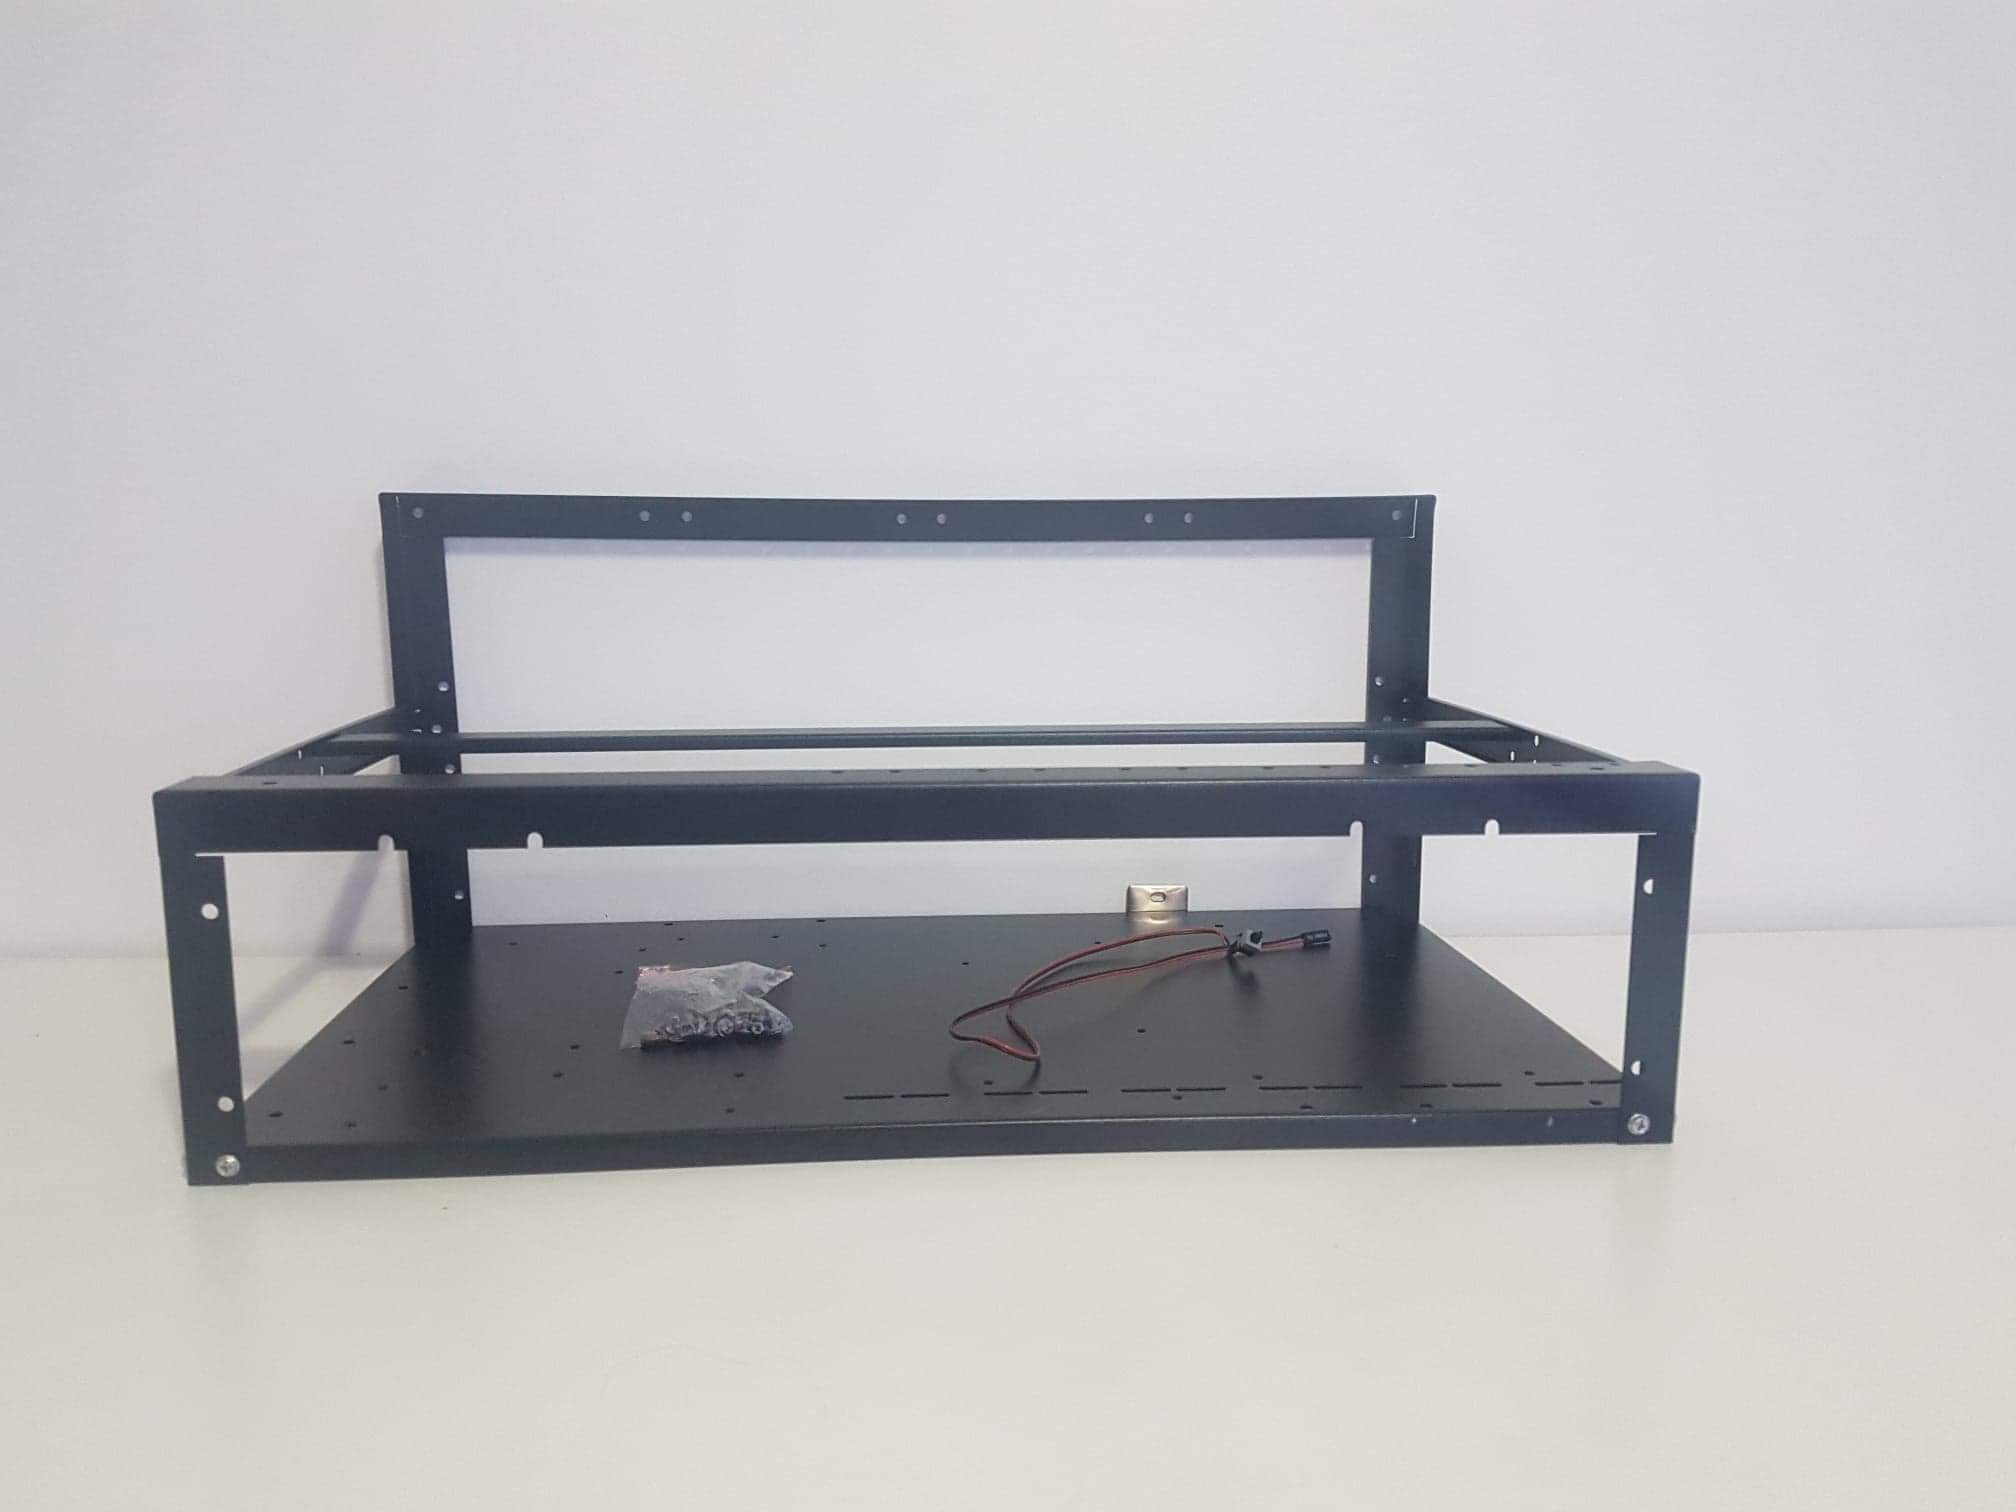 Mining Rig Frame, 8 GPU Open Air Mining Computer Frame Rig Case with Fixed Installation Screw Pack for Crypto Currency Mining Accessories - AndoVolution Australia - GPU Risers - crypto mining - Located: North Lakes, Brisbane, QLD, Australia